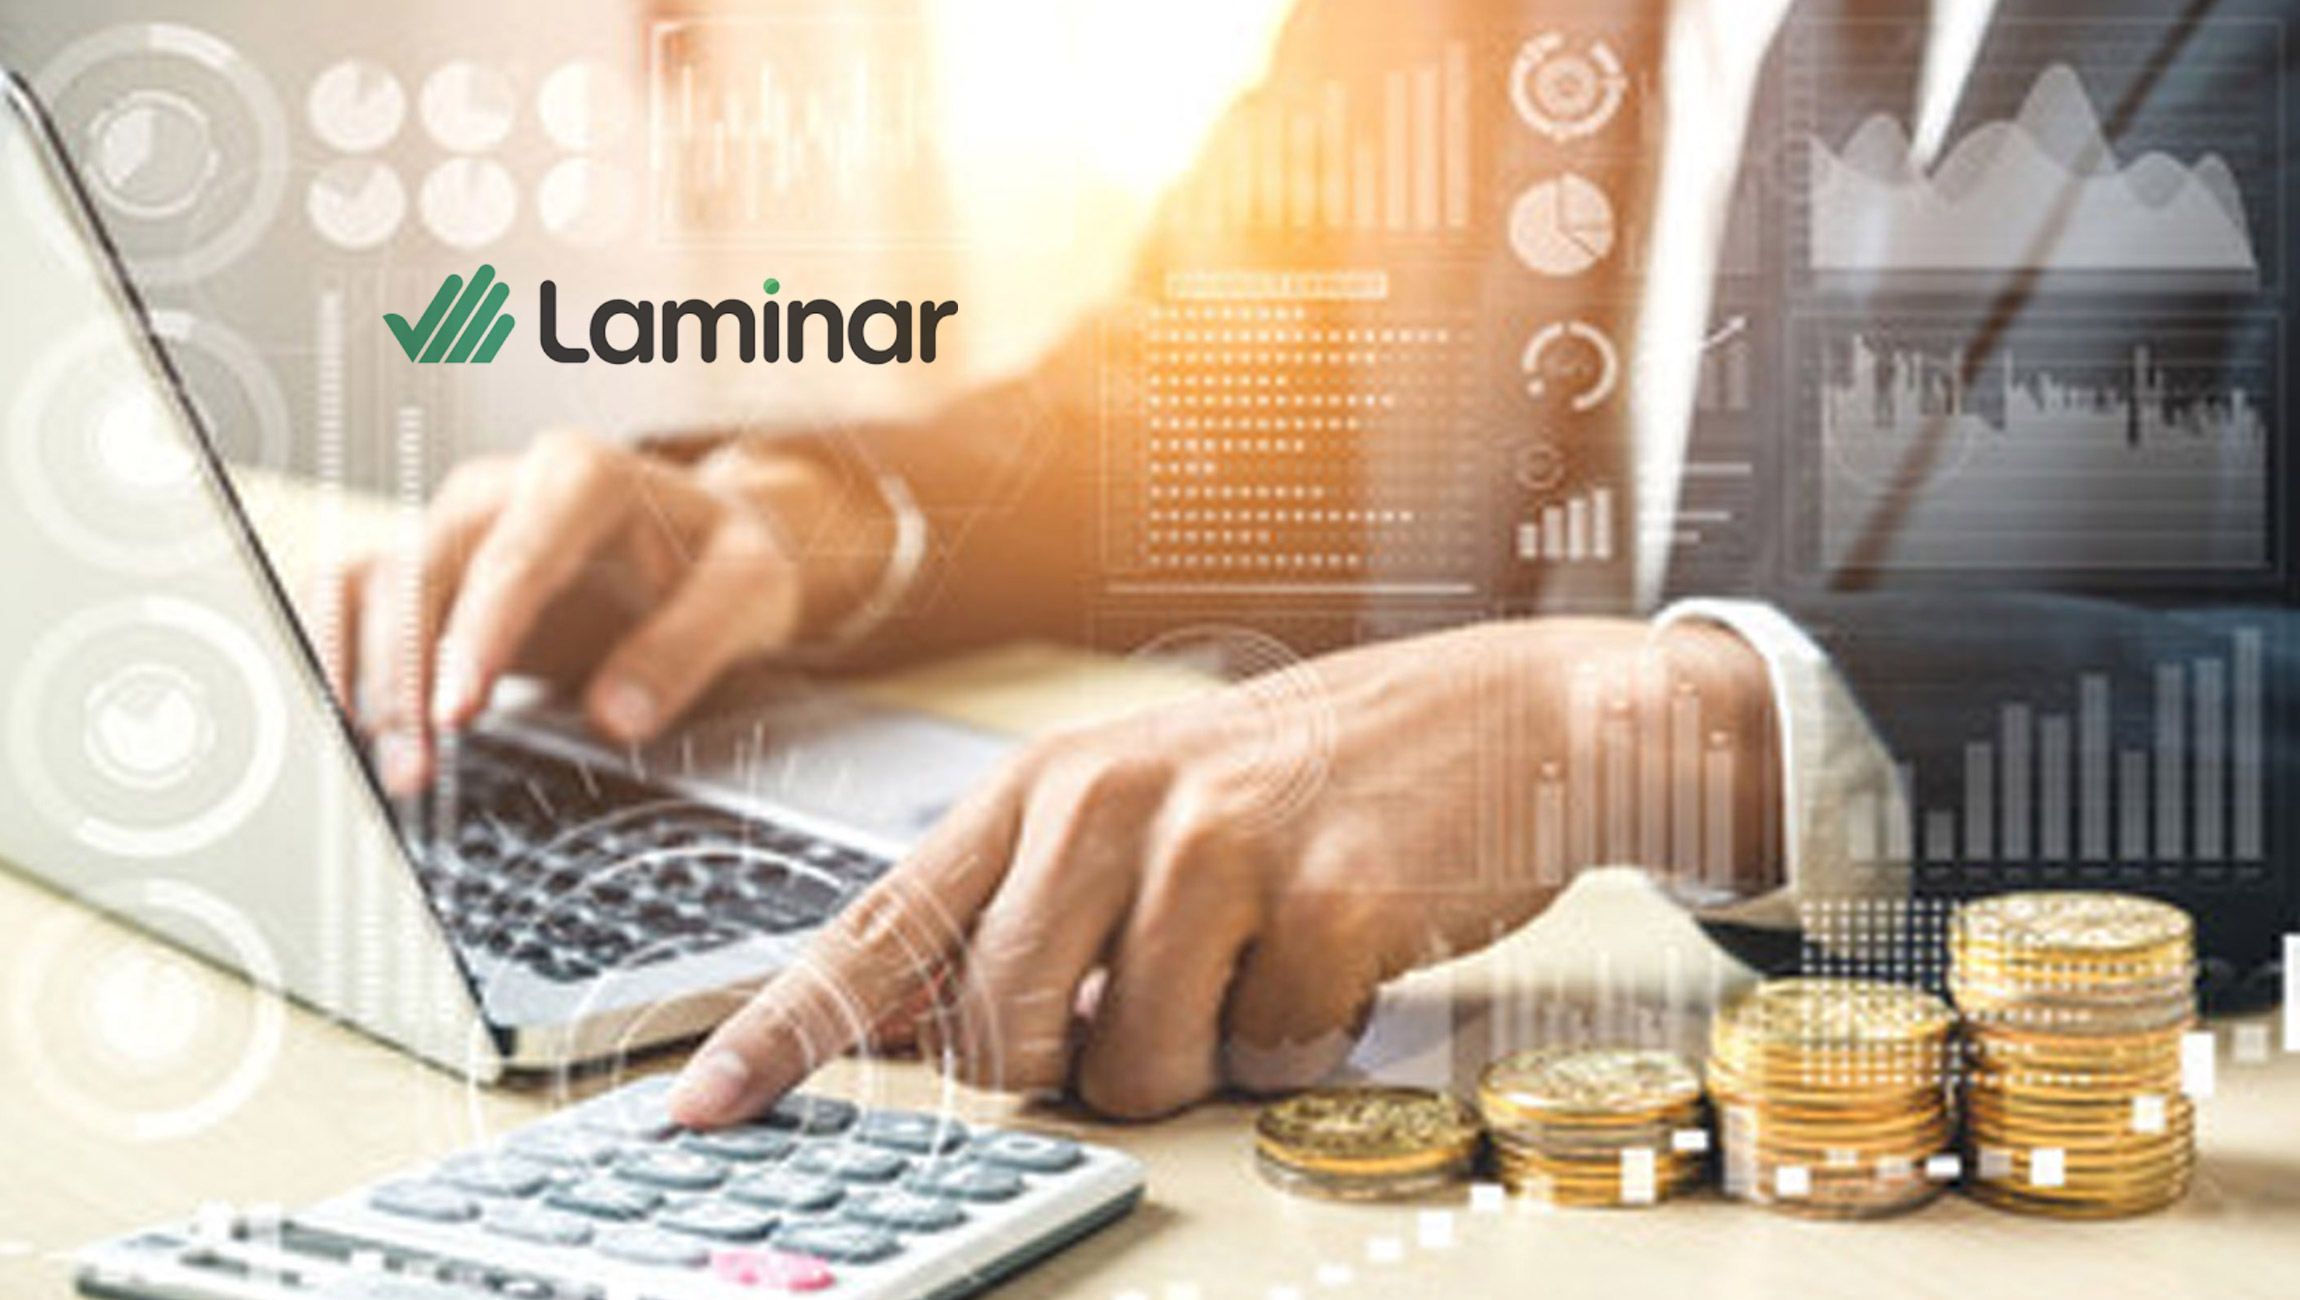 Laminar Doubles Funding in Less Than Six Months to $67 Million, Leading the Way in Cloud Data Security 1